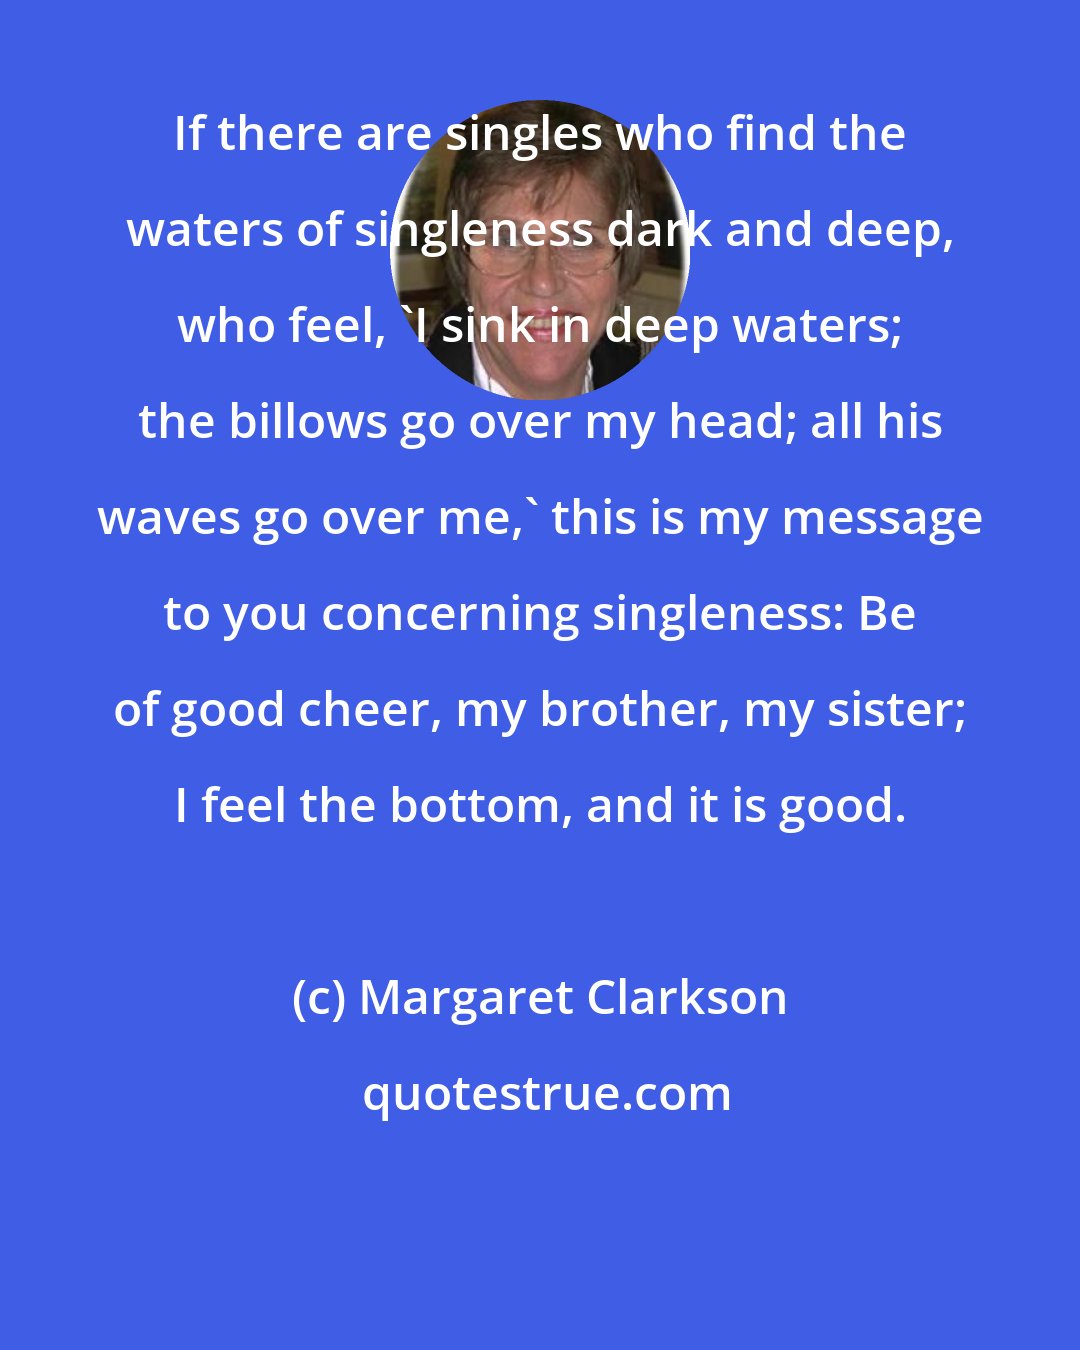 Margaret Clarkson: If there are singles who find the waters of singleness dark and deep, who feel, 'I sink in deep waters; the billows go over my head; all his waves go over me,' this is my message to you concerning singleness: Be of good cheer, my brother, my sister; I feel the bottom, and it is good.